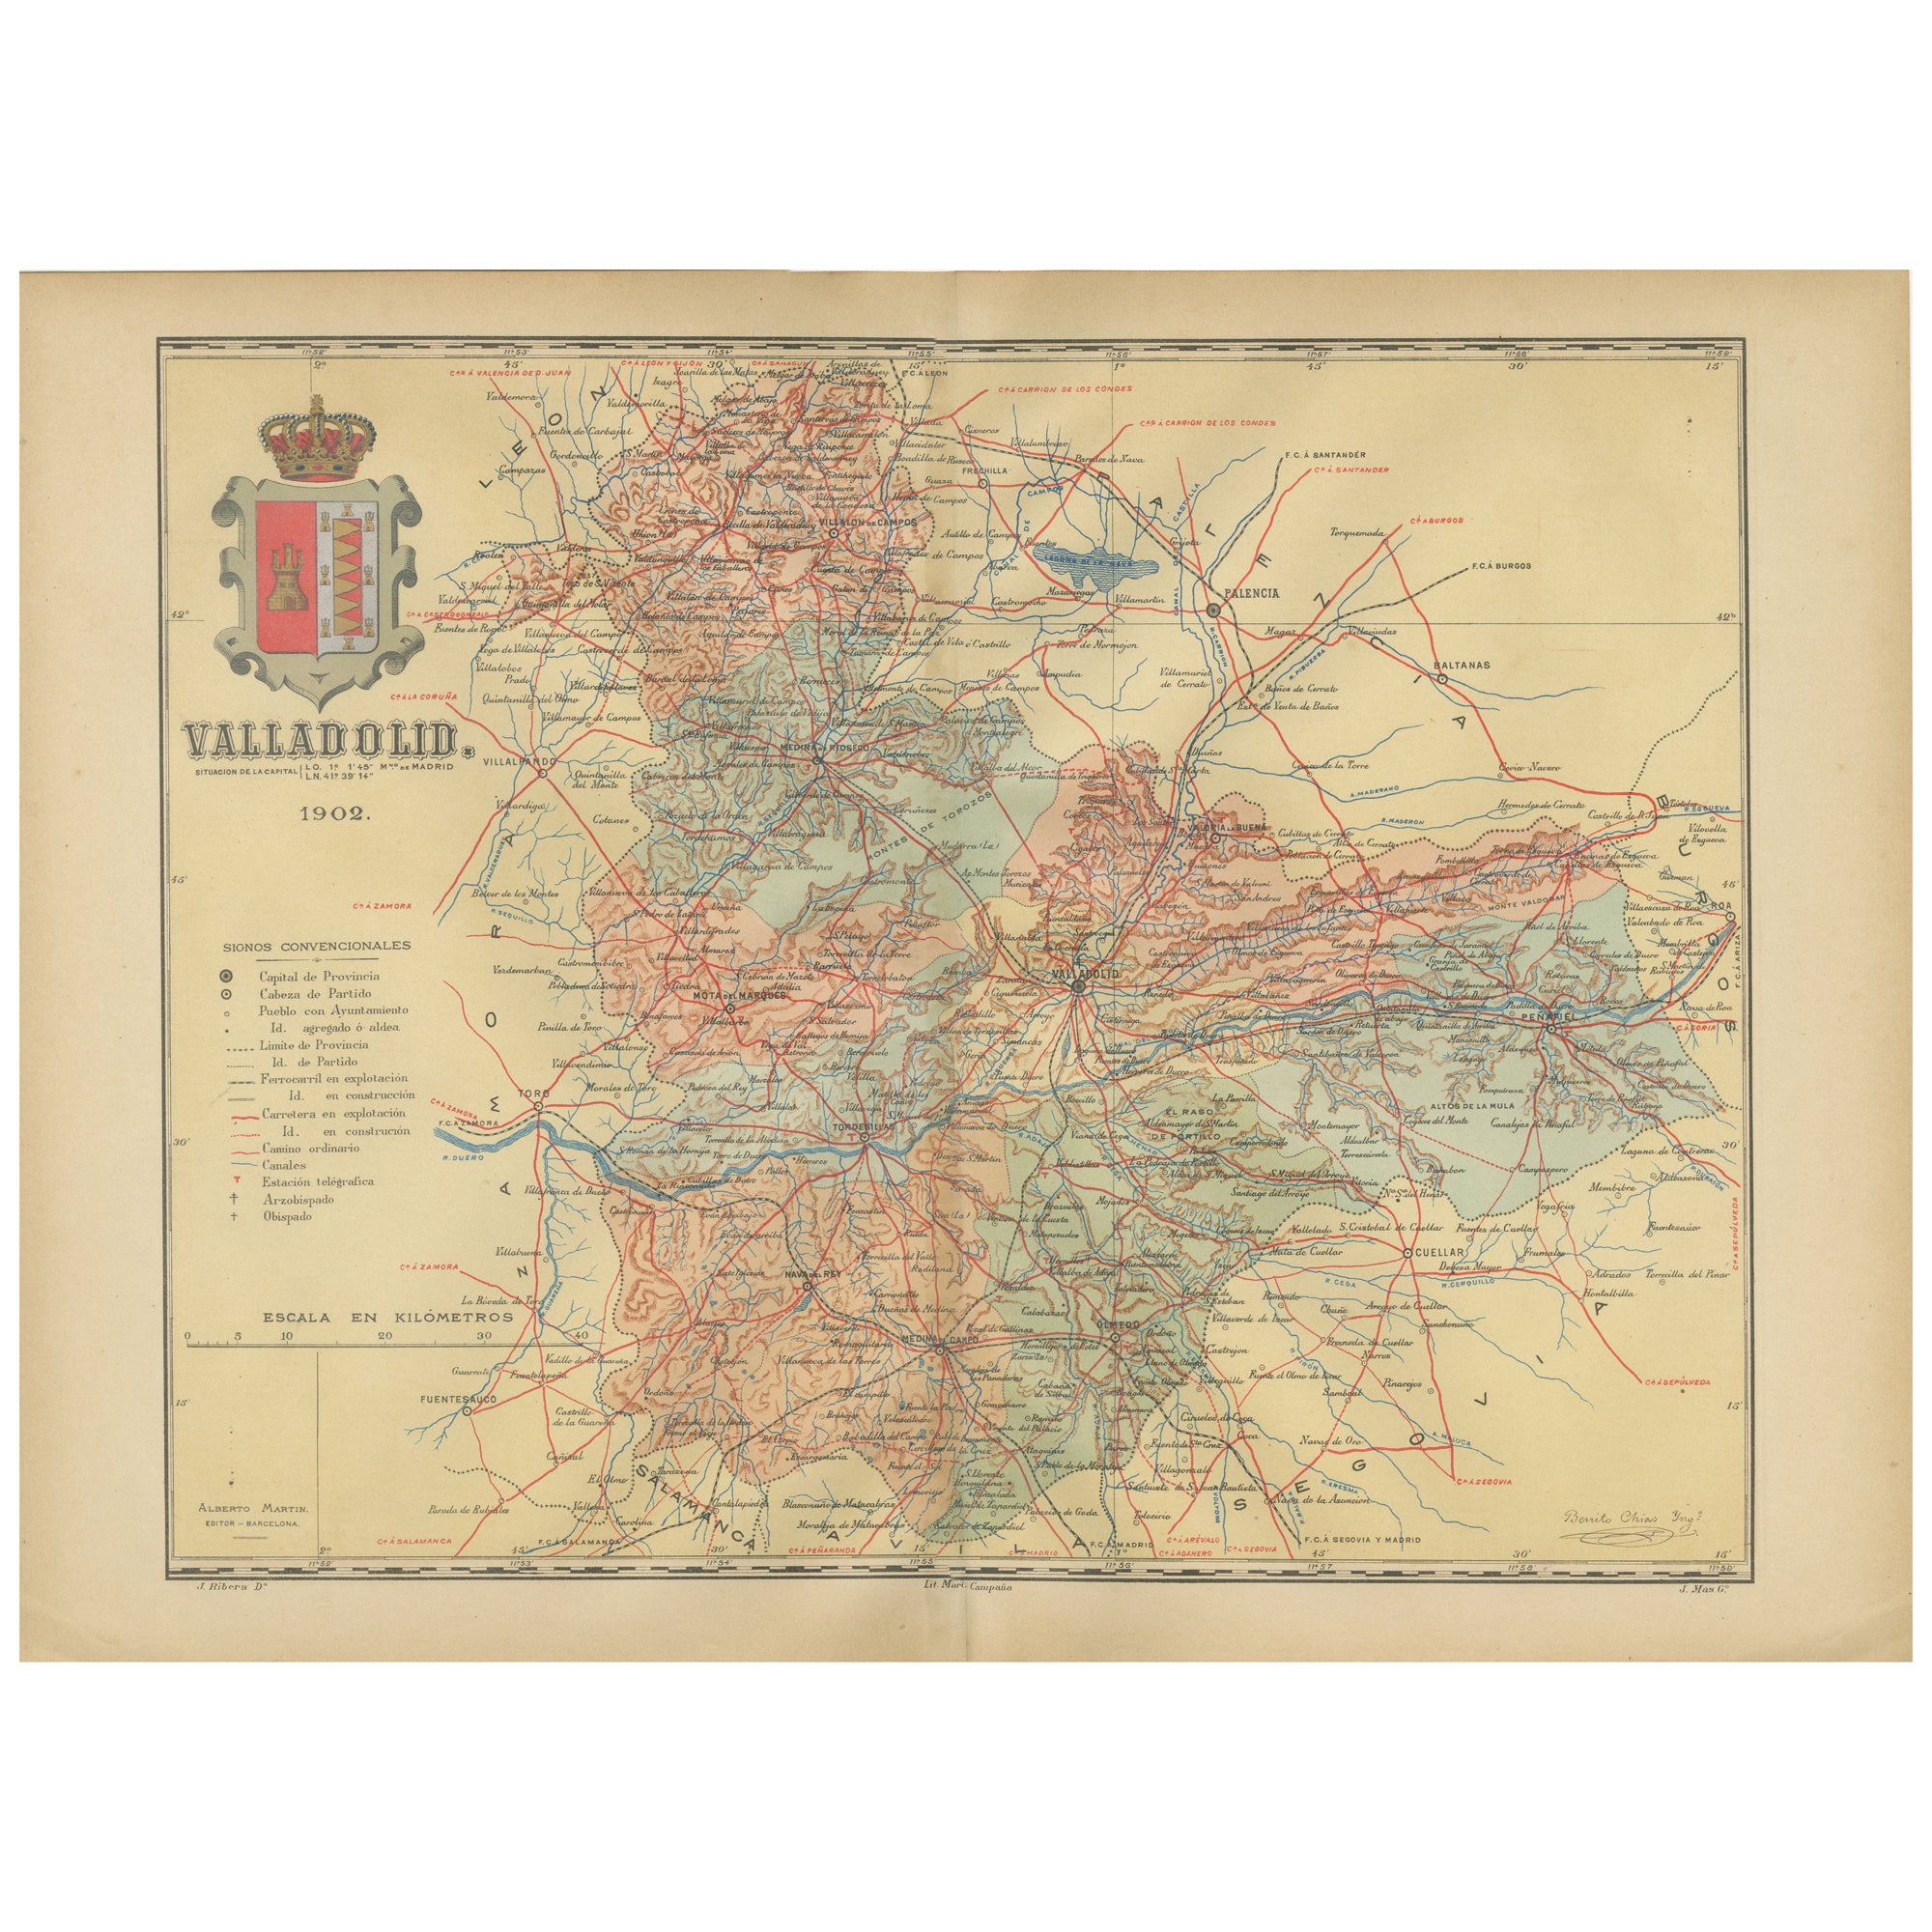 Anrtique Map of the Province of Valladolid, Central Spain, 1902